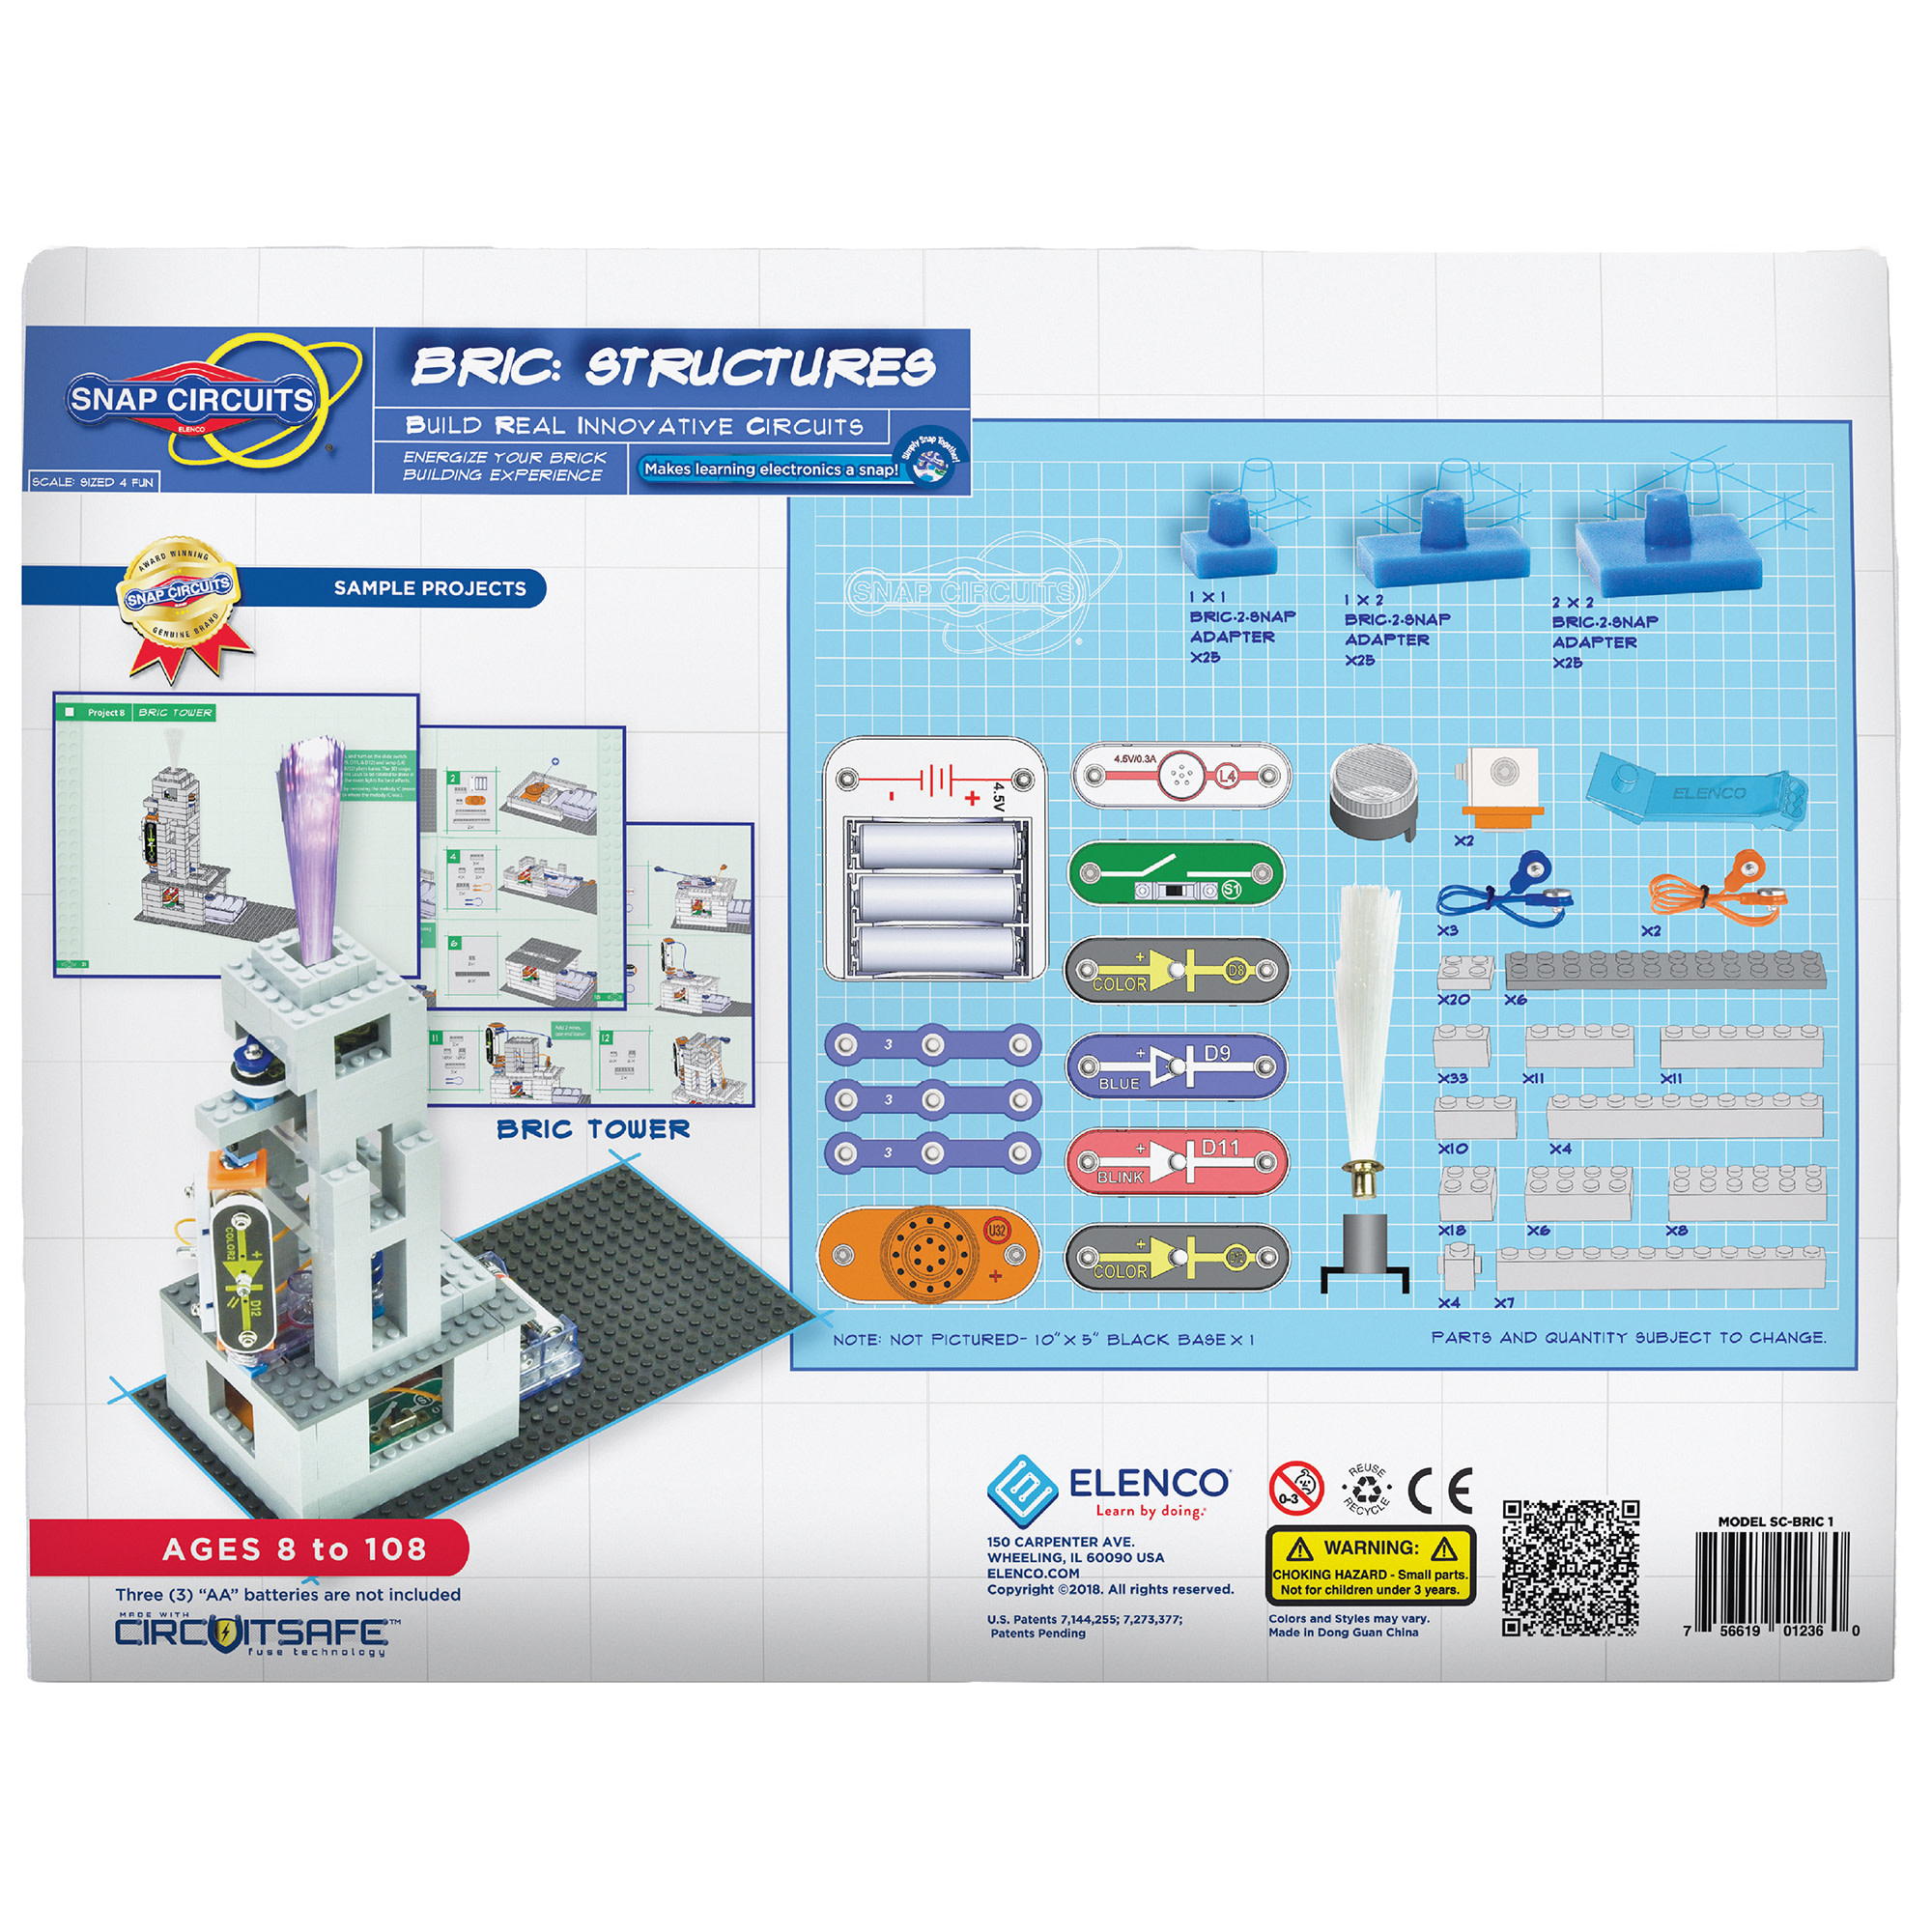 Snap Circuits - Bric: Structures